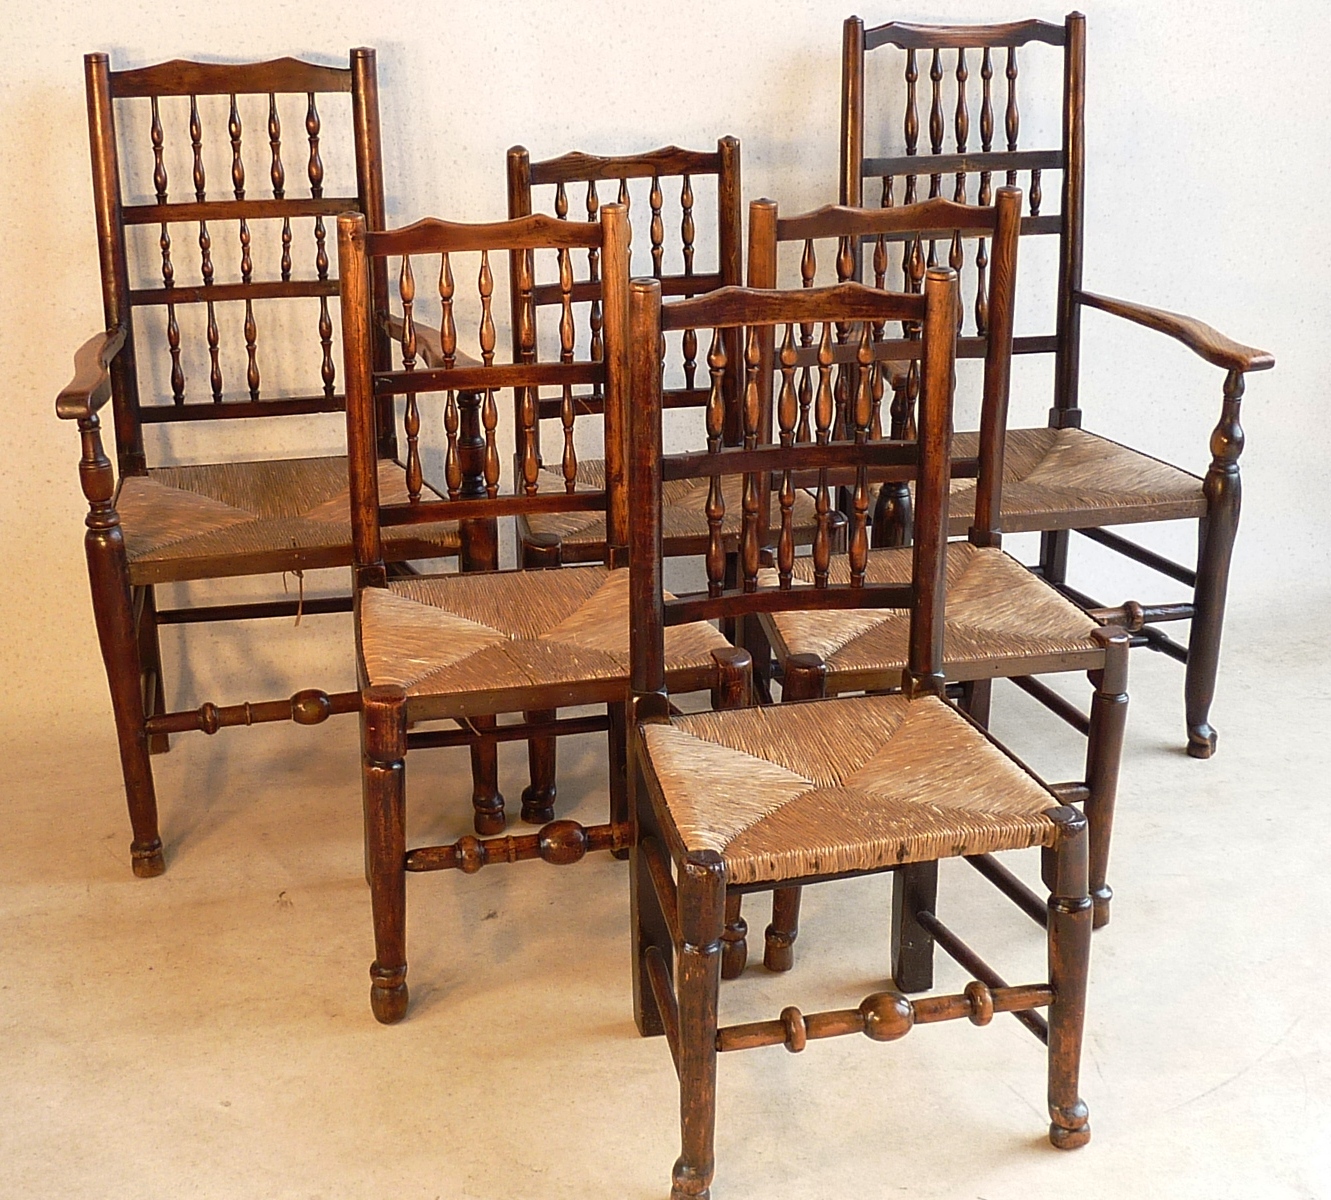 An early 19th Century Harlequin set of six (4+2) Lancashire style spindle back rush seated ash